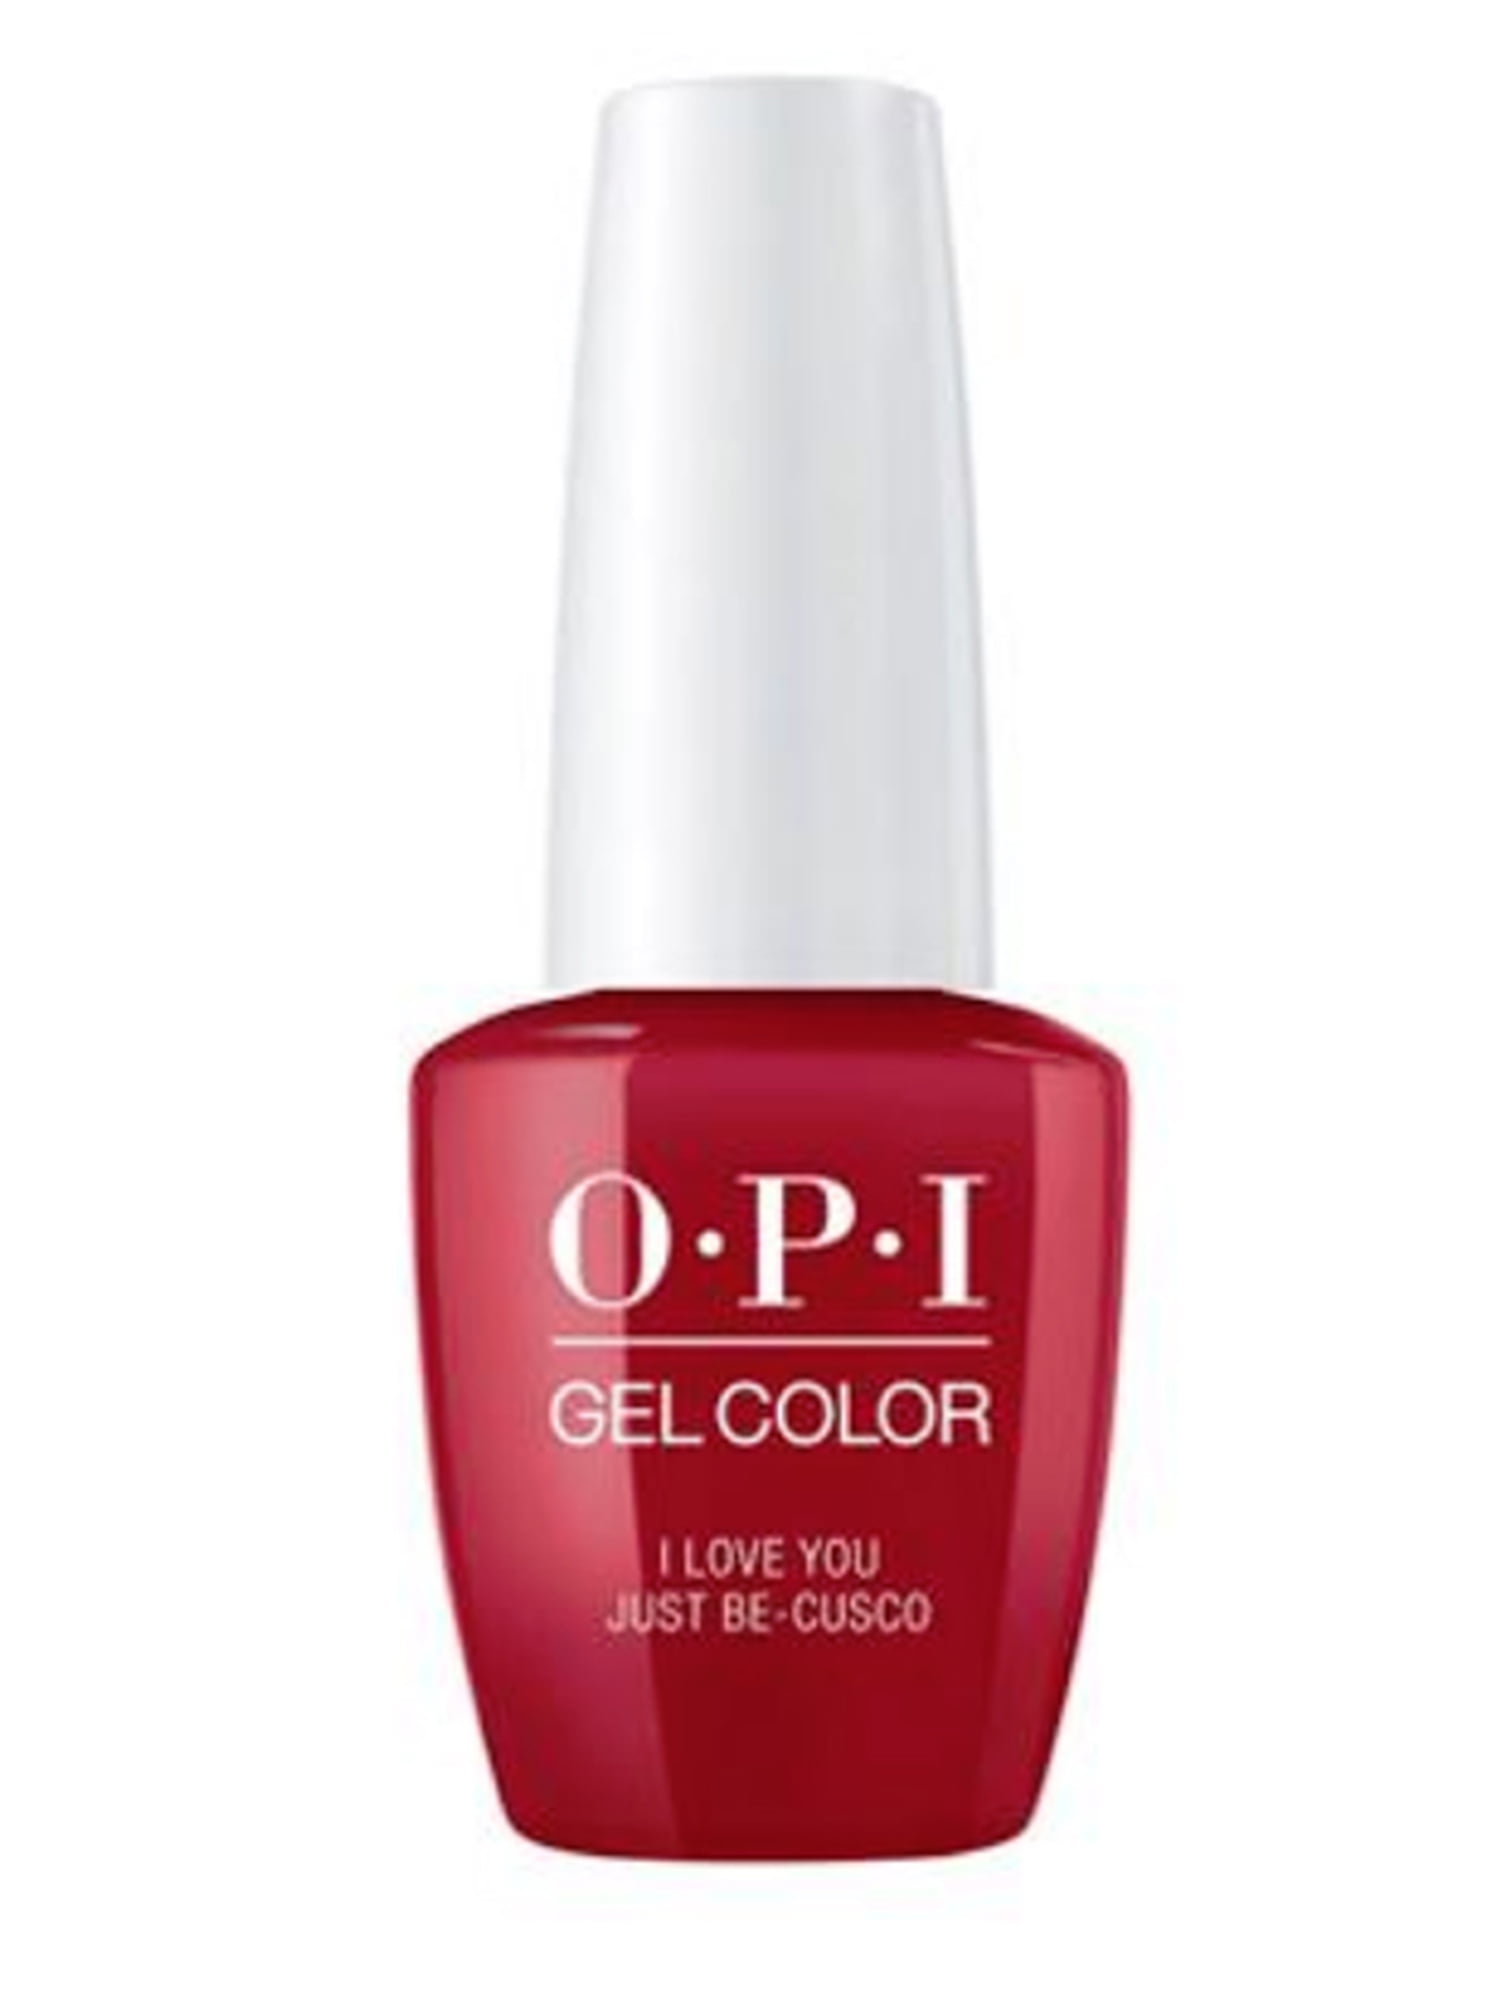 OPI Gel Color, Peru Collection - 2018 Fall collection, I Love You Just ...